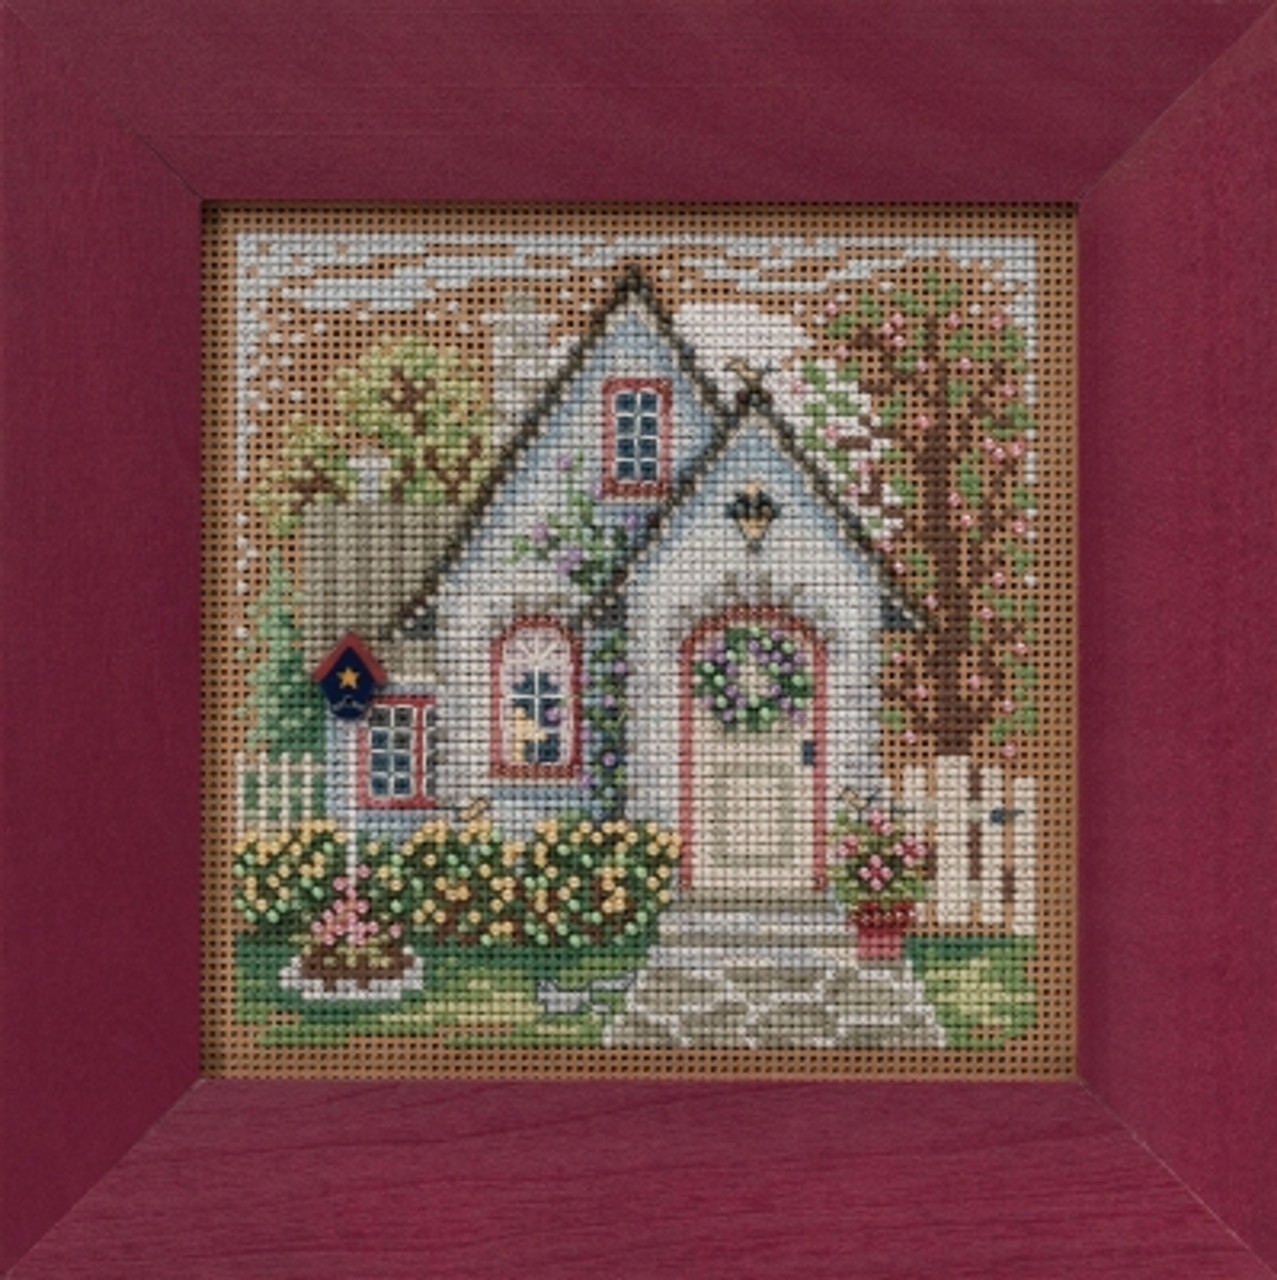 Trellis + cross stitch = awesome stitching frame - Peacock & Fig